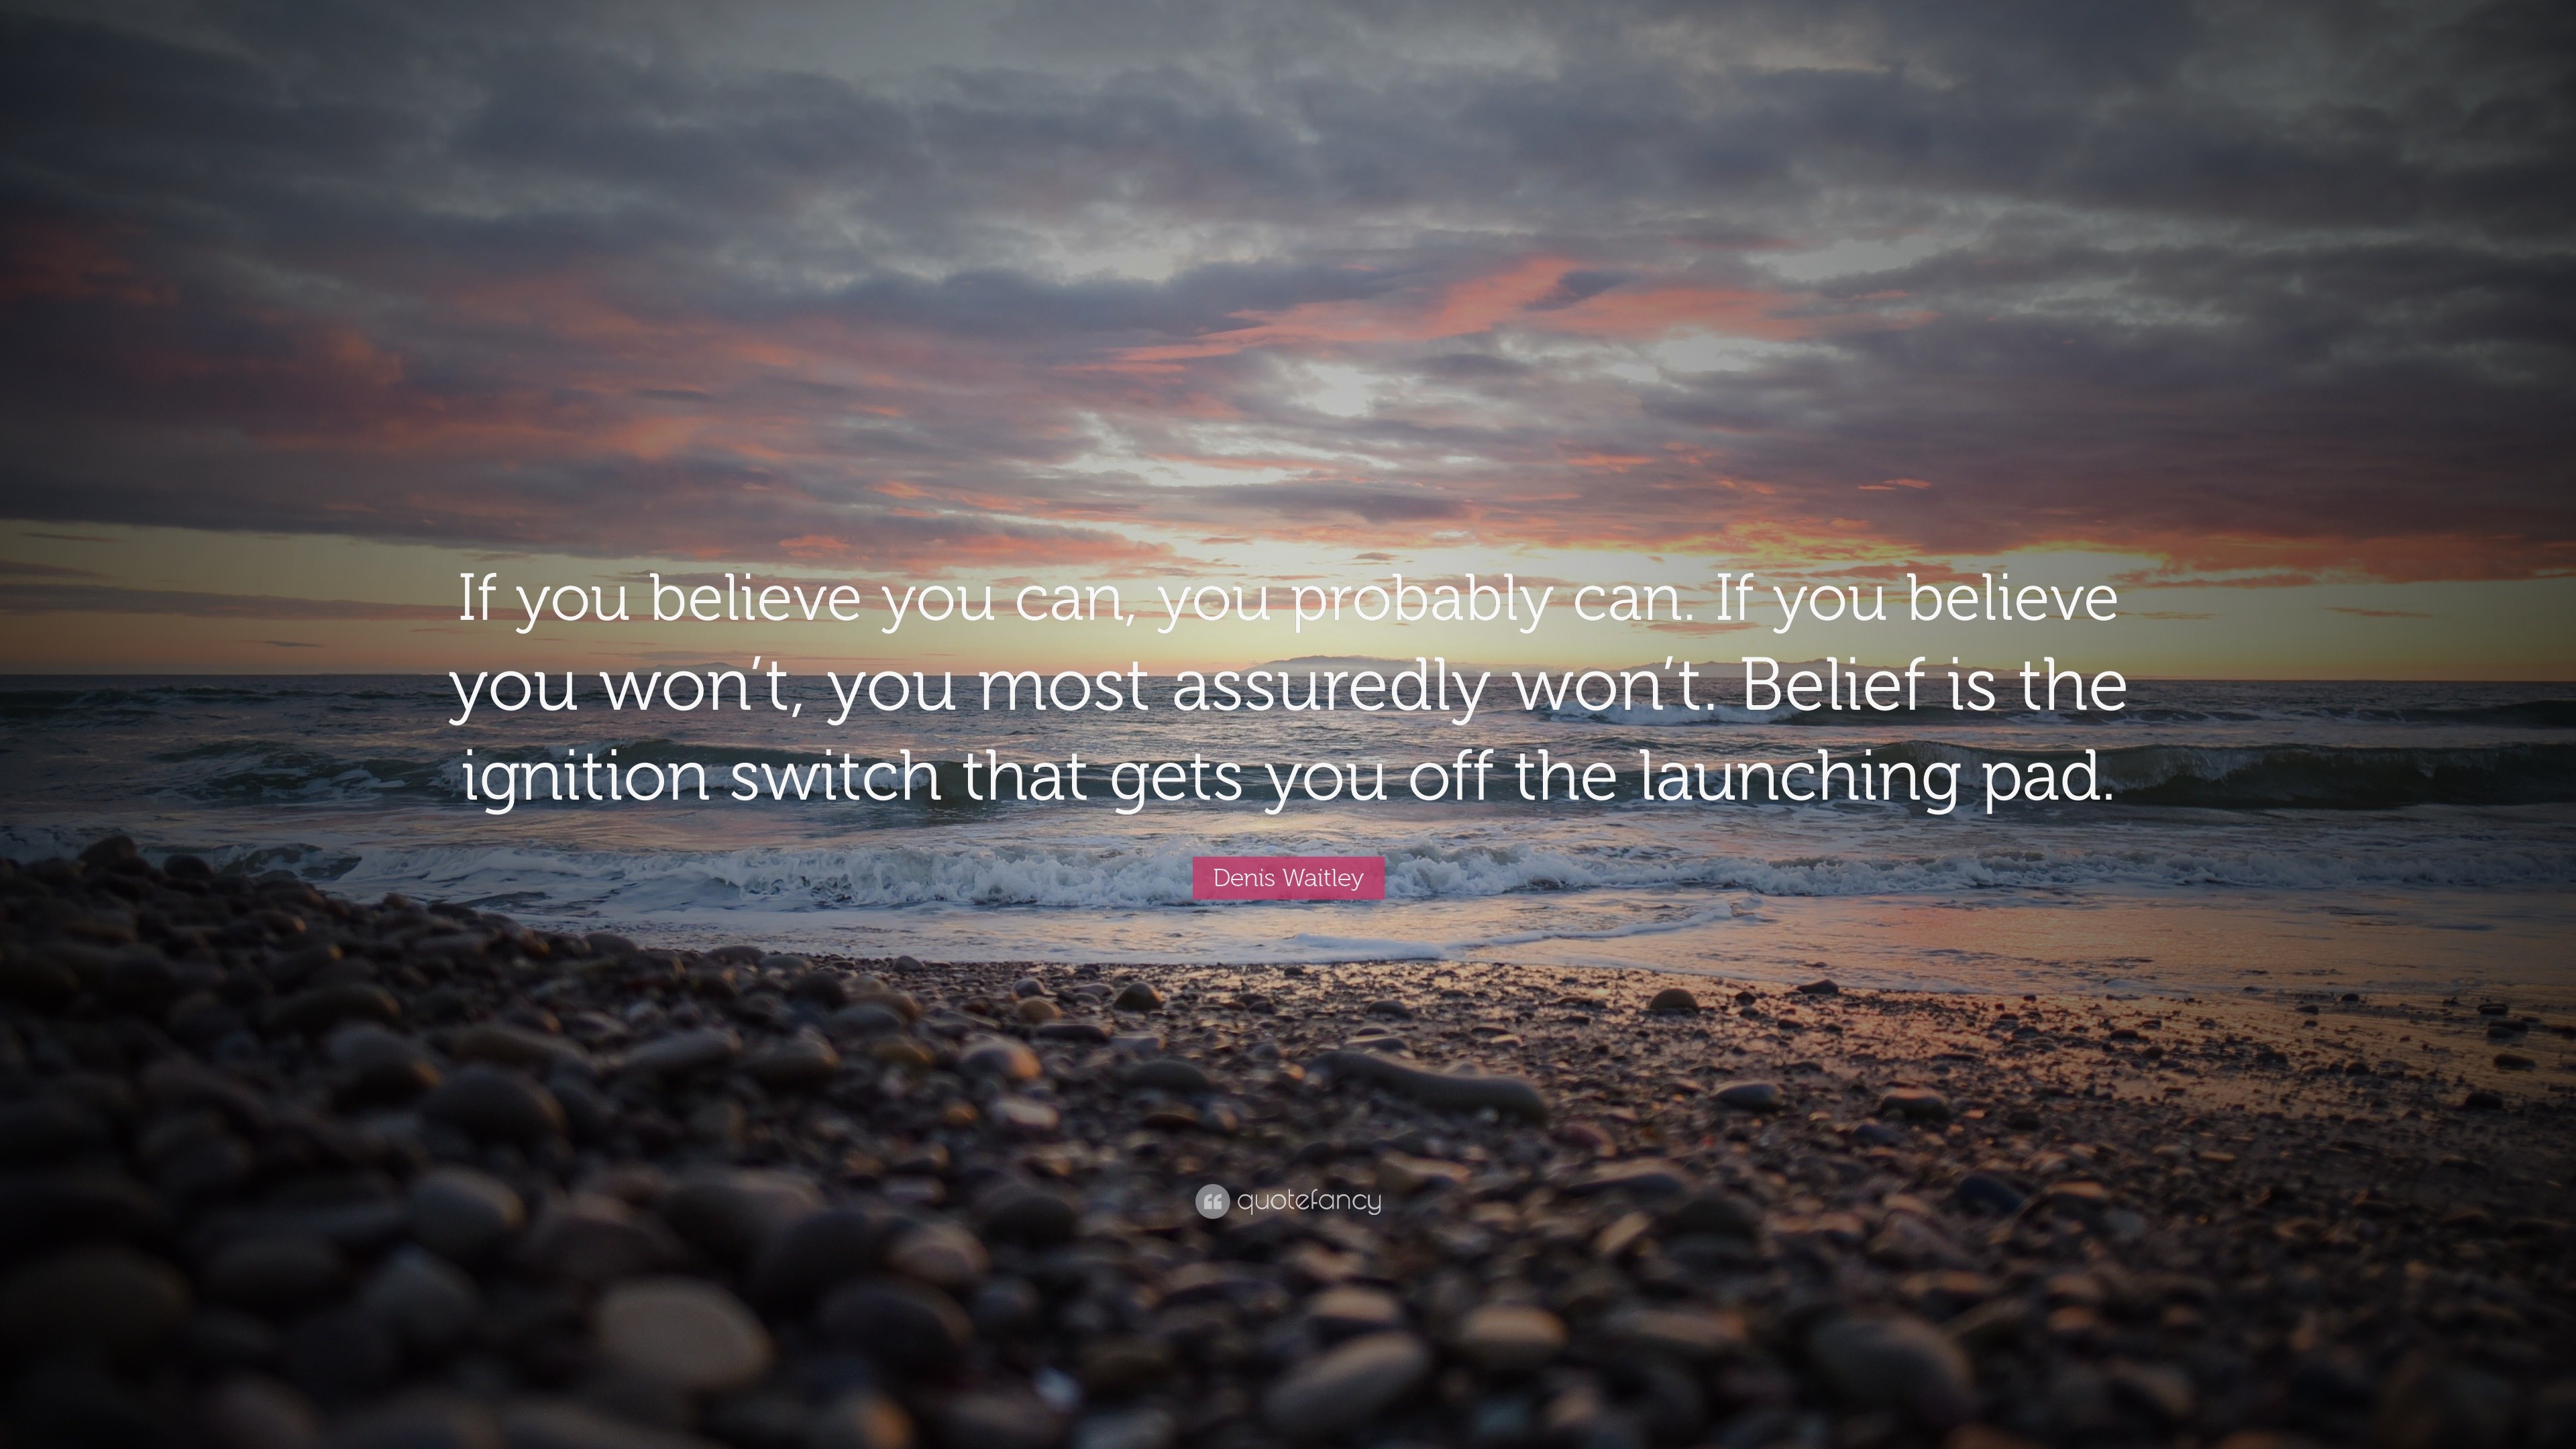 Denis Waitley Quote: “If you believe you can, you probably can. If you ...